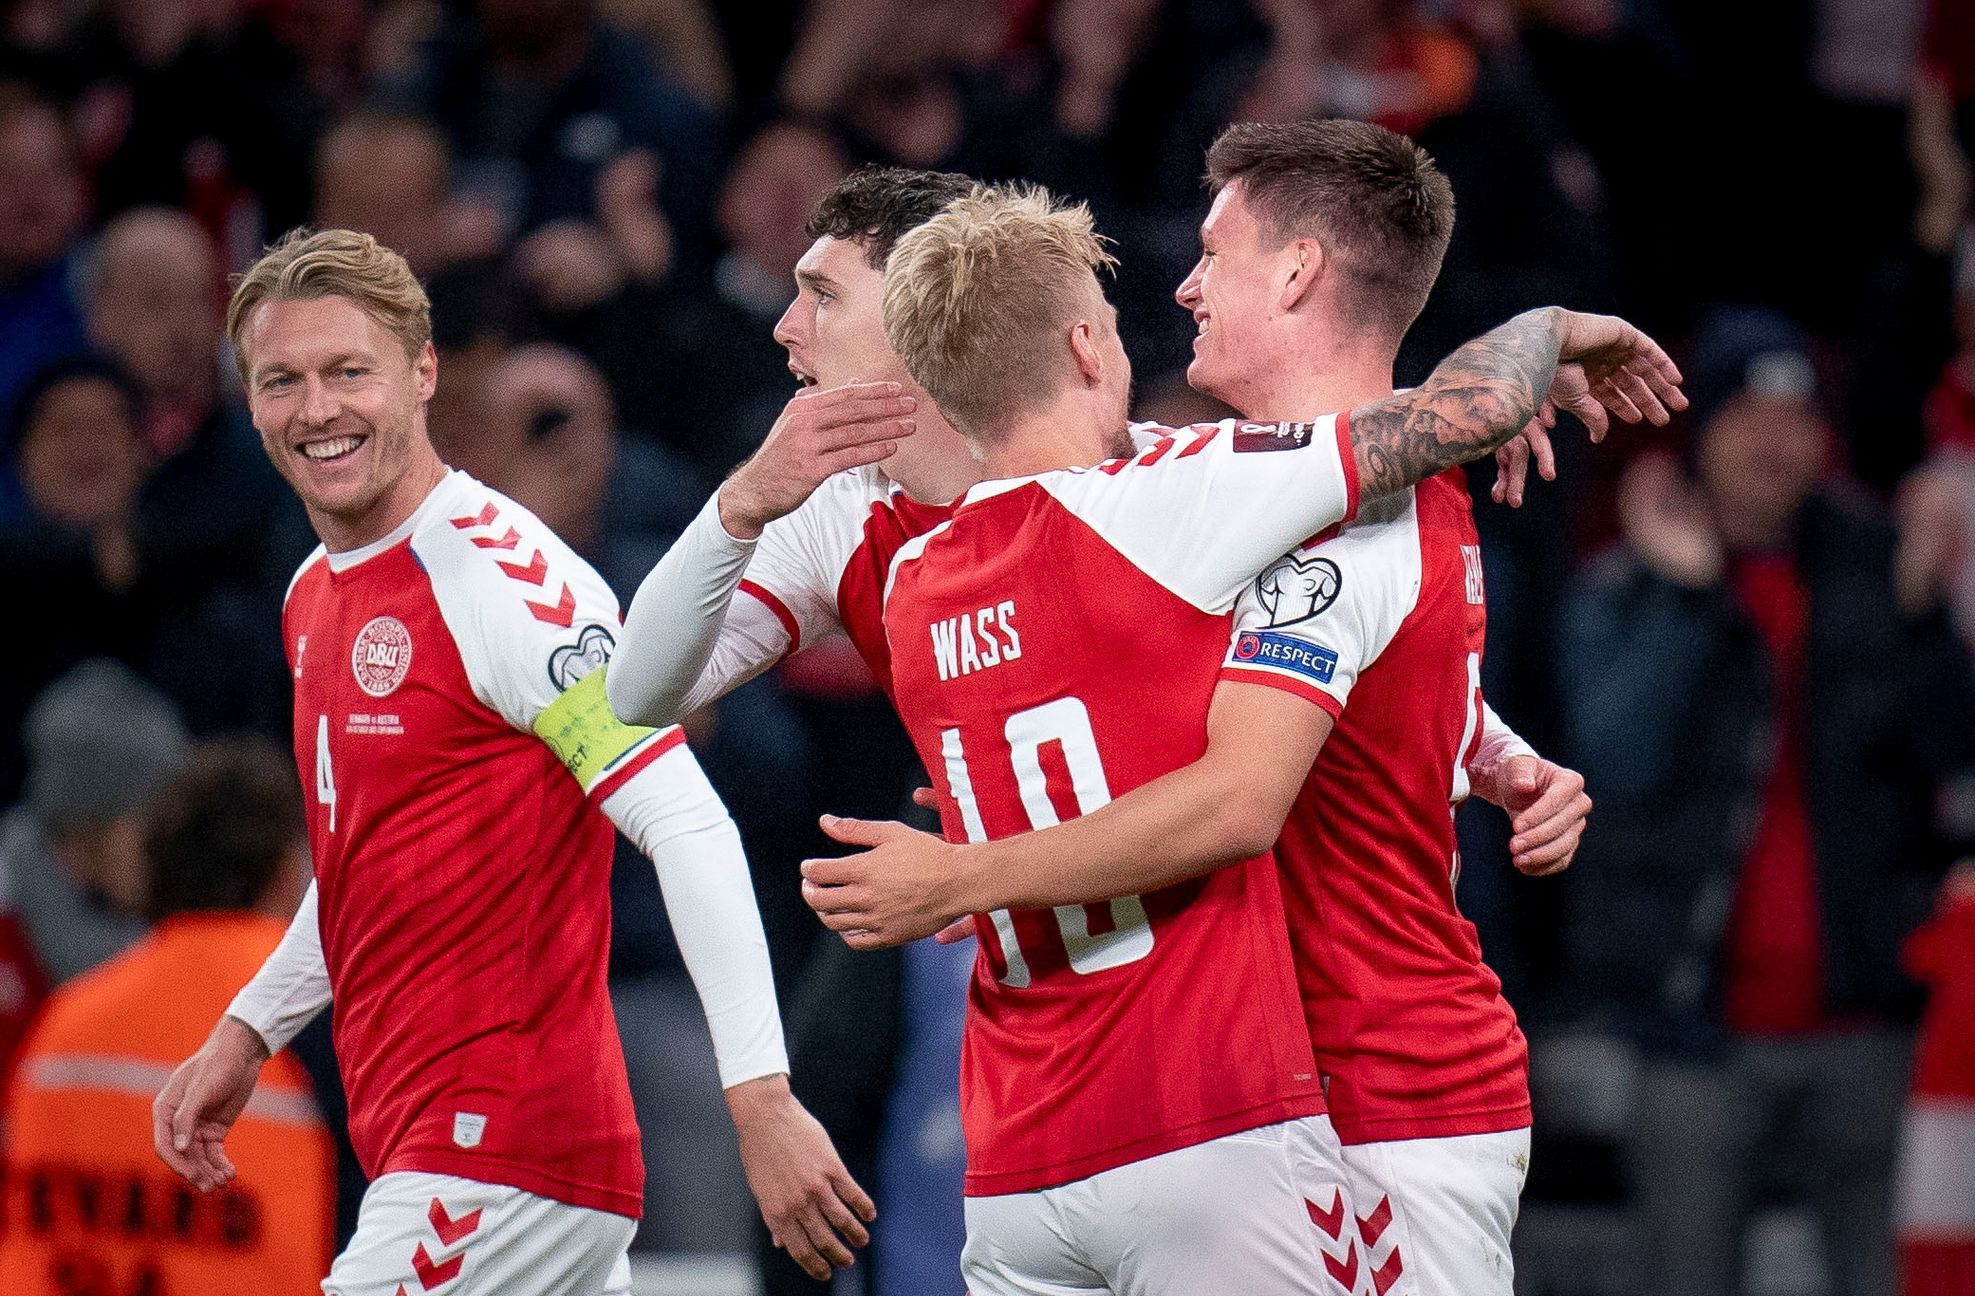 Danish footballers, as a second team, have moved from qualifying to the 2022 World Cup